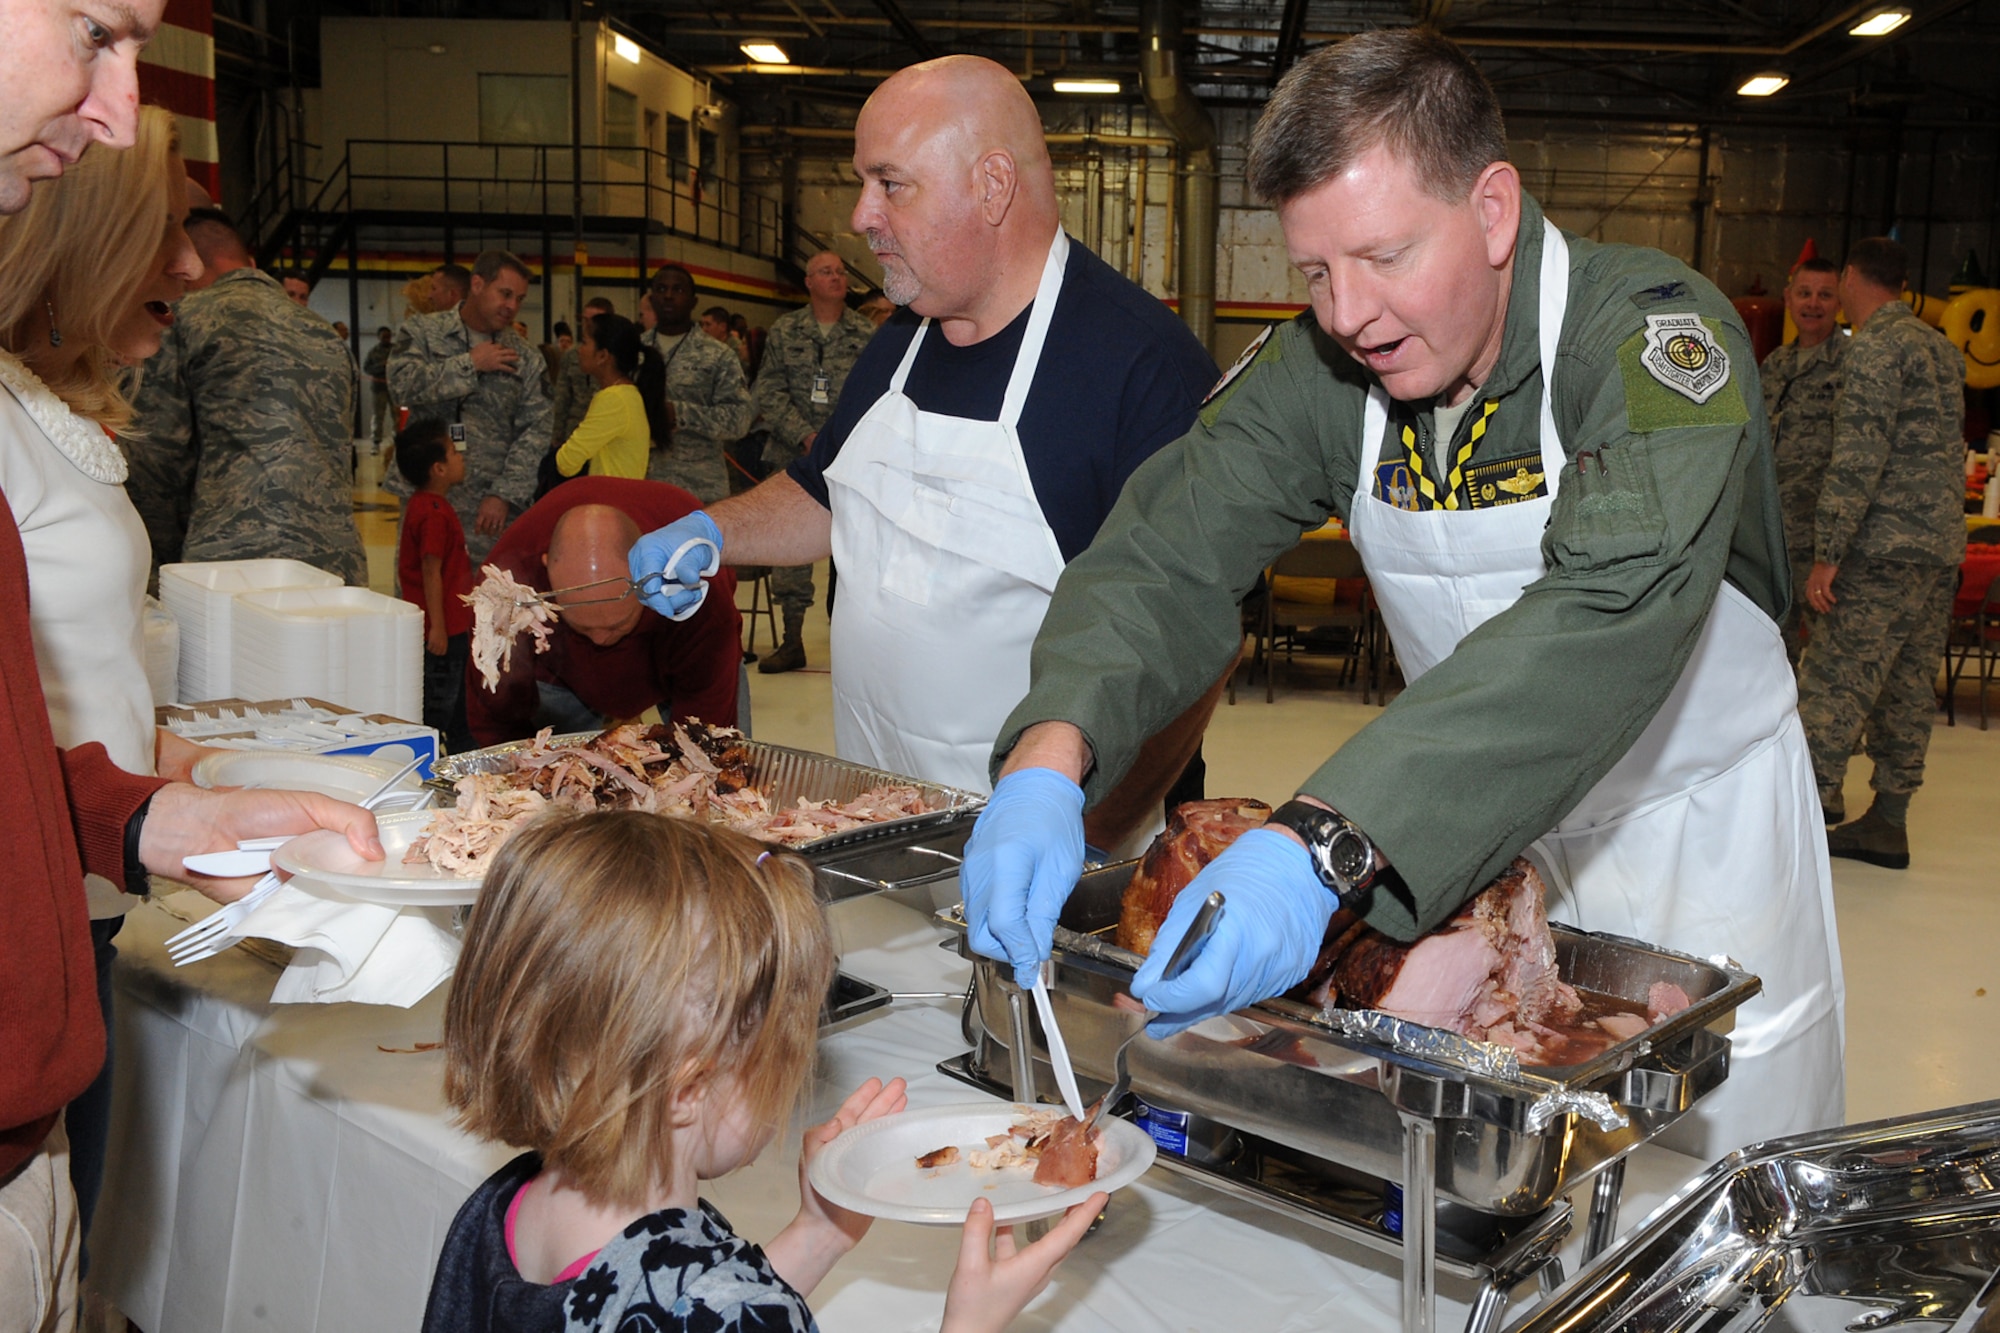 Col. Bryan Cook (right), 419th Operations Group commander, and Steve Curtis (center), Layton City mayor, serve food to Airmen and their families during a Thanksgiving feast here today. (U.S. Air Force photo/Alex Lloyd)